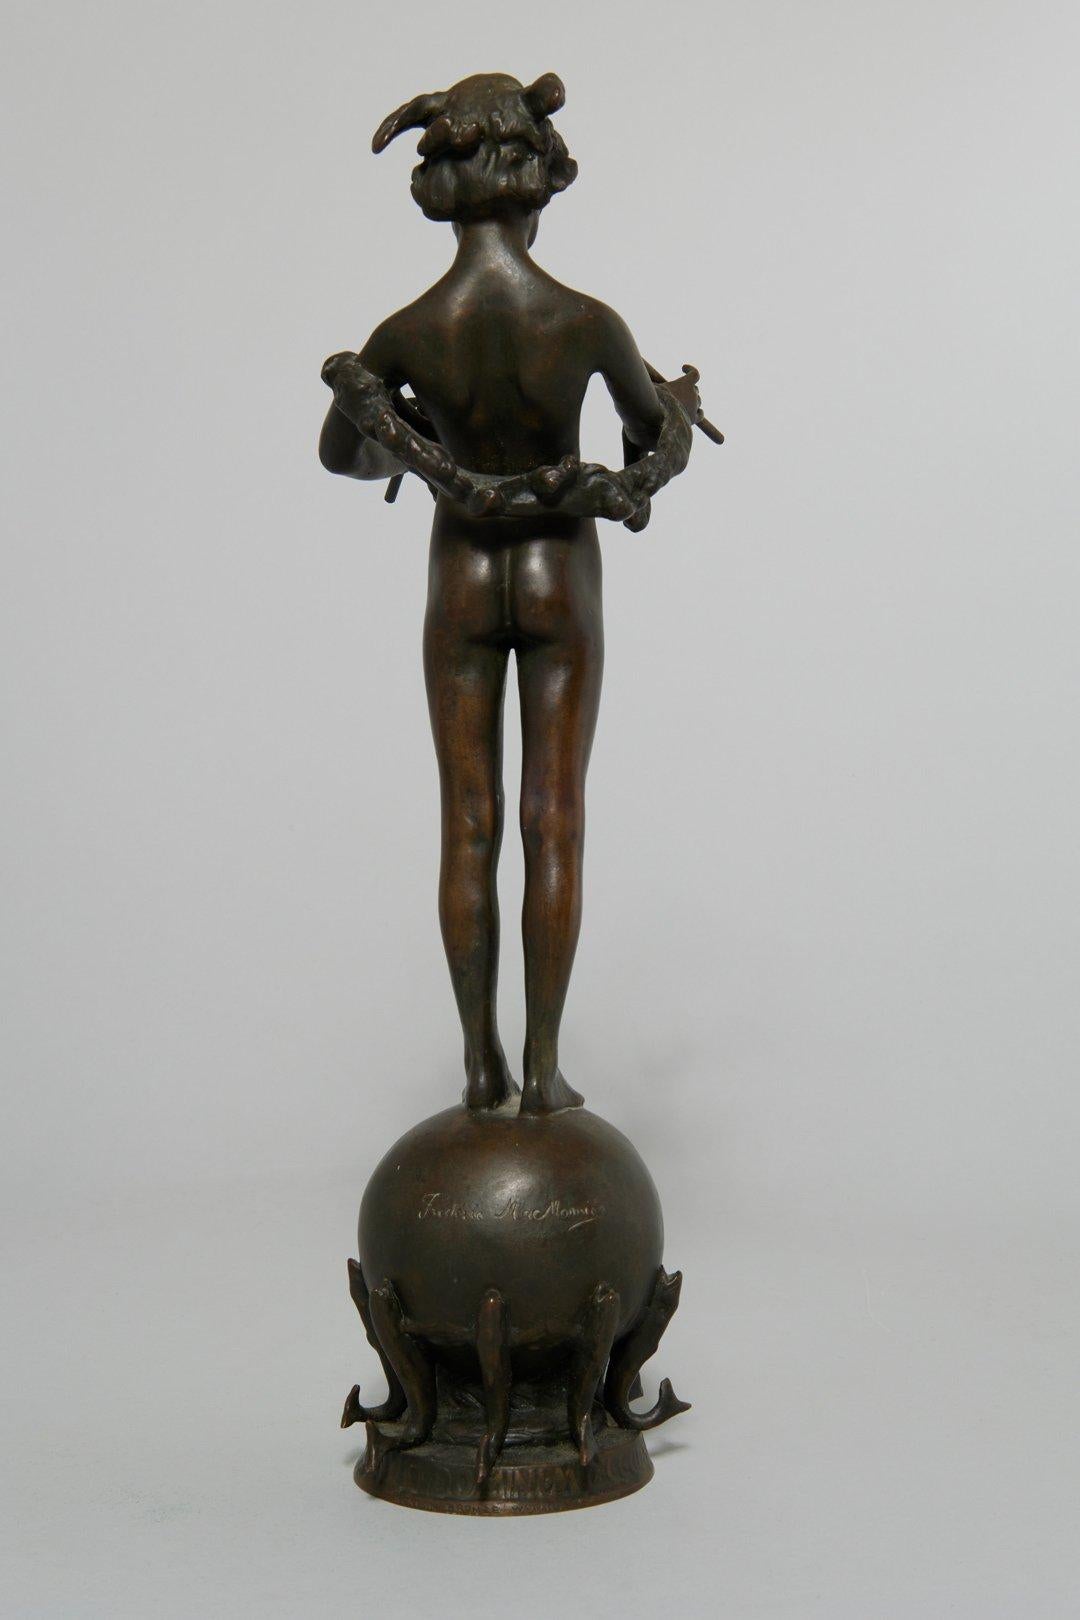 Frederick W. MacMonnies (American, 1863-1937)
Pan of Rohallion, 1889-90 (Garden 22)
Bronze
Signed on base, 'ROMAN BRONZE WORKS NY' at base
14.25 x 4 x 6 inches

A sculptor of classical figures, American-born Frederick MacMonnies had fame in the